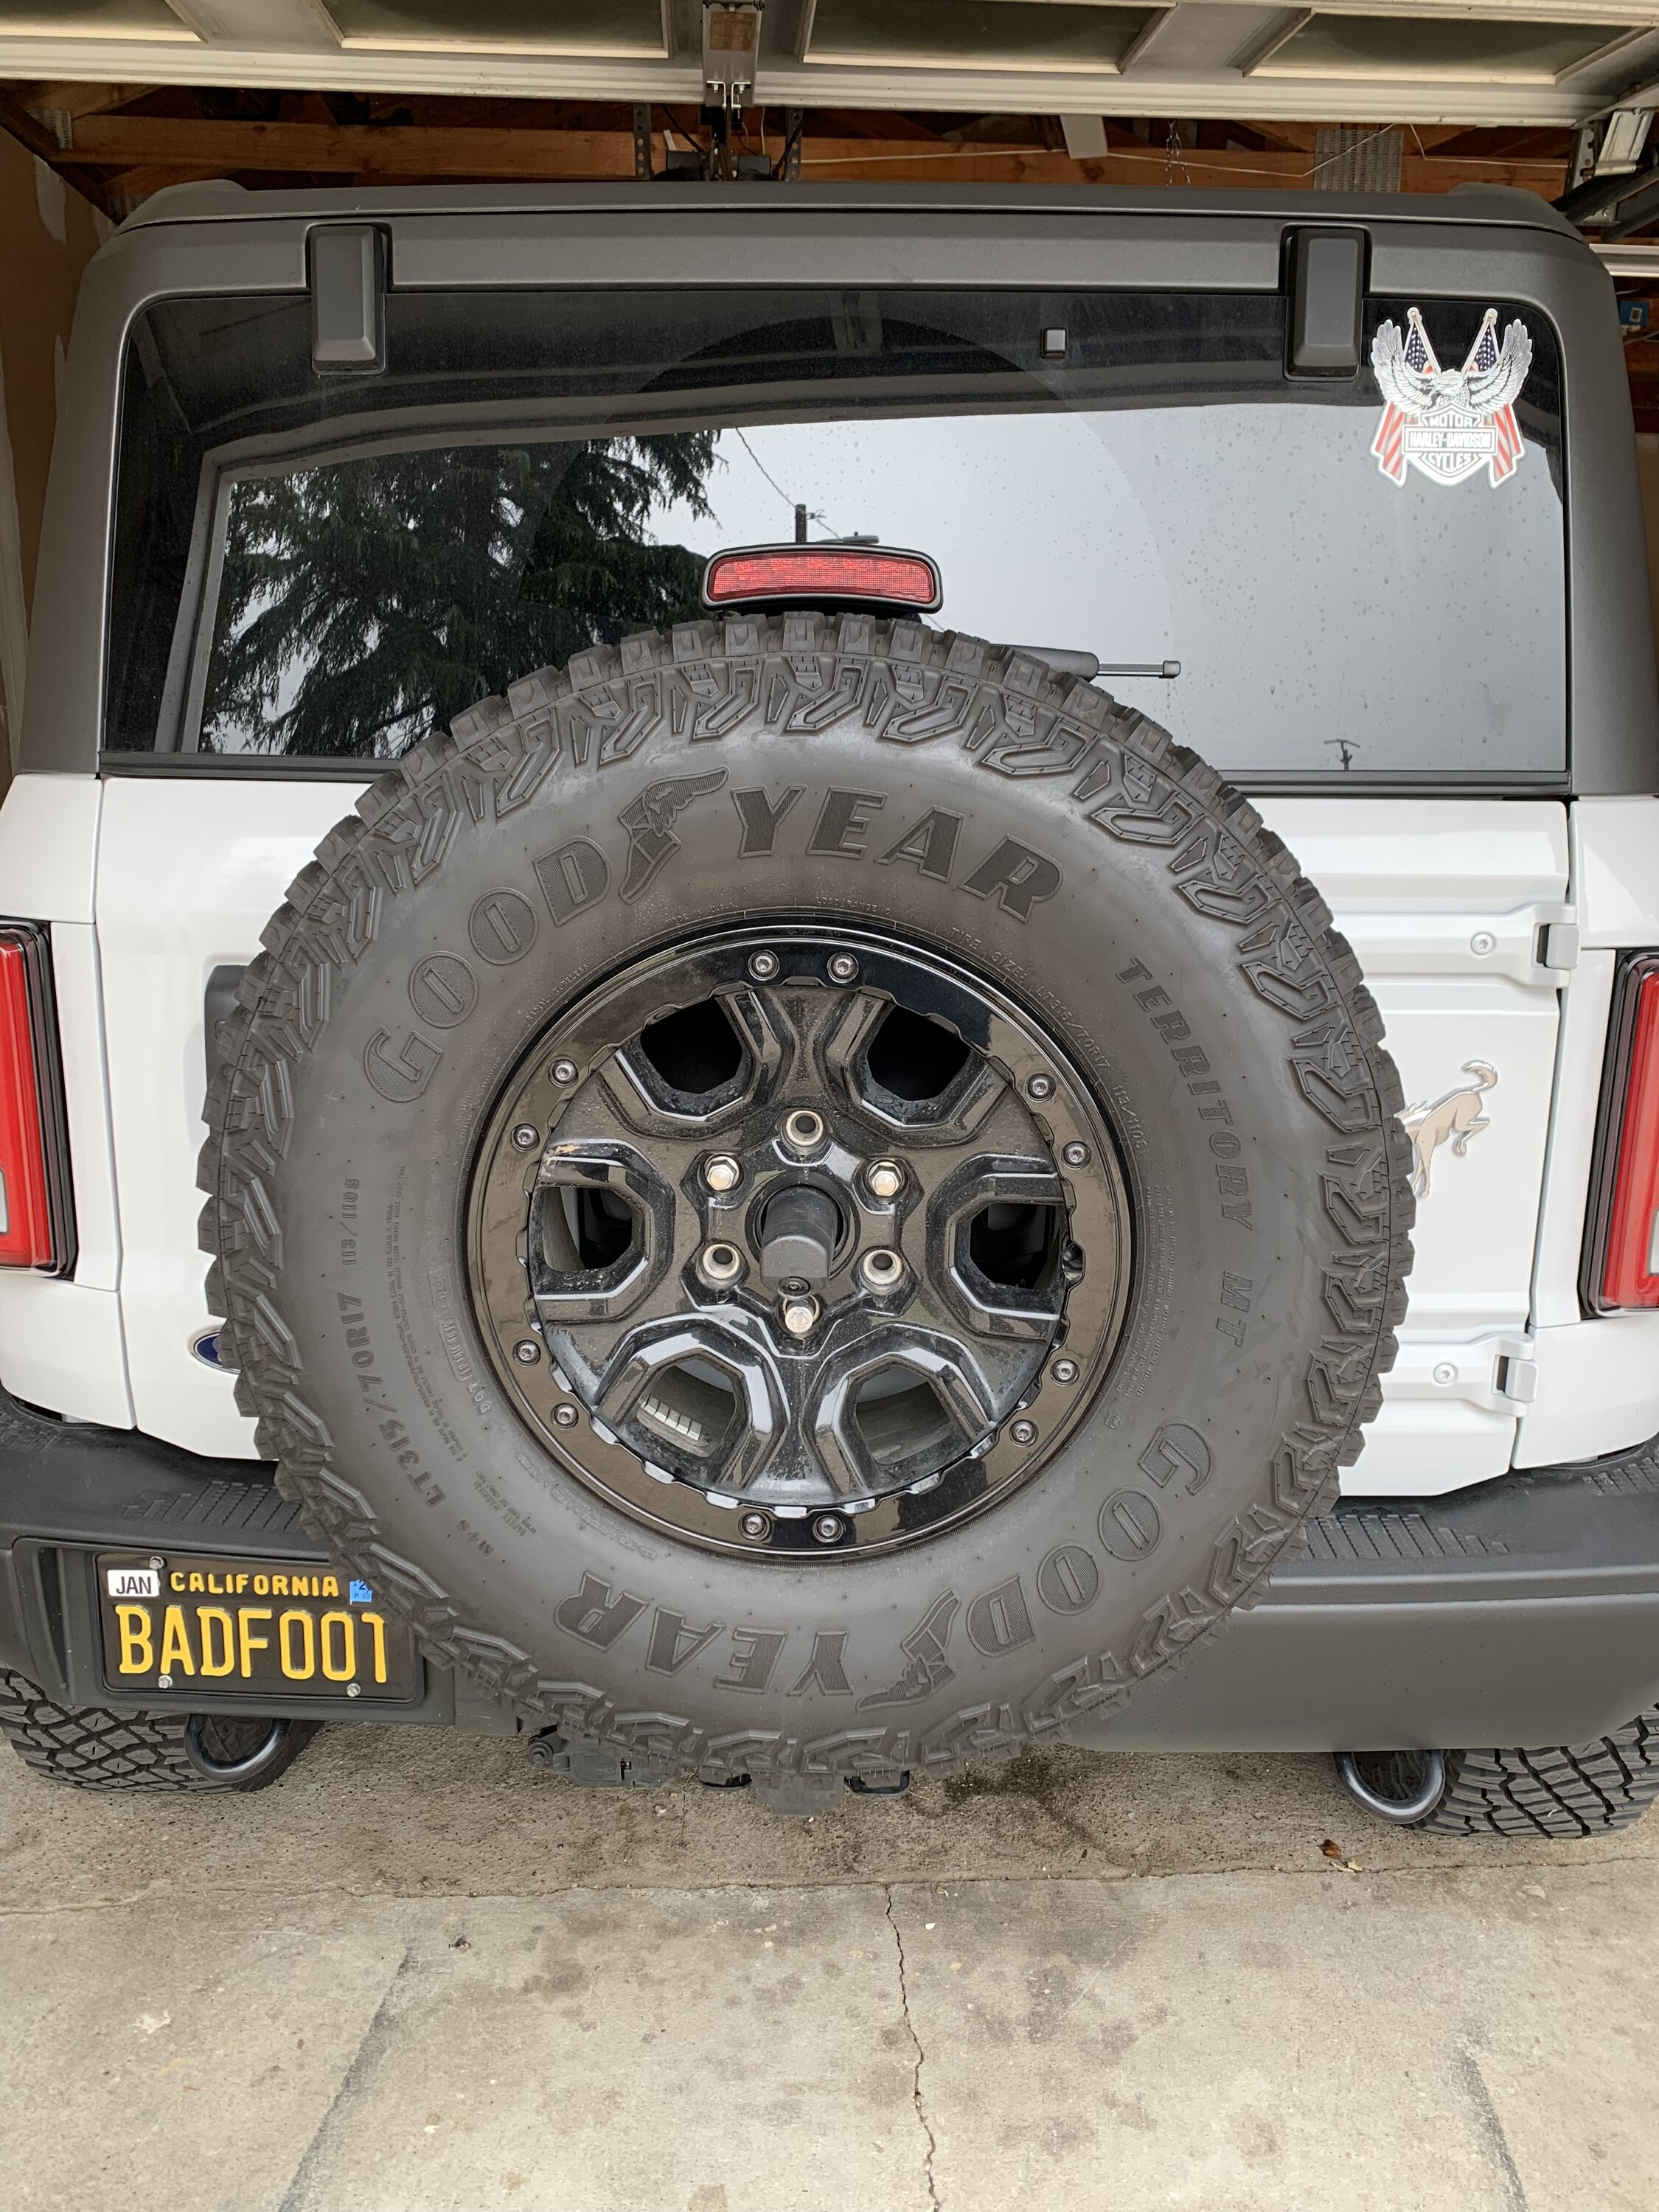 Ford Bronco Have a name / nickname for your Bronco? 69377763205__A5EA4695-F5B3-4B43-85AF-67A3614E6A3B